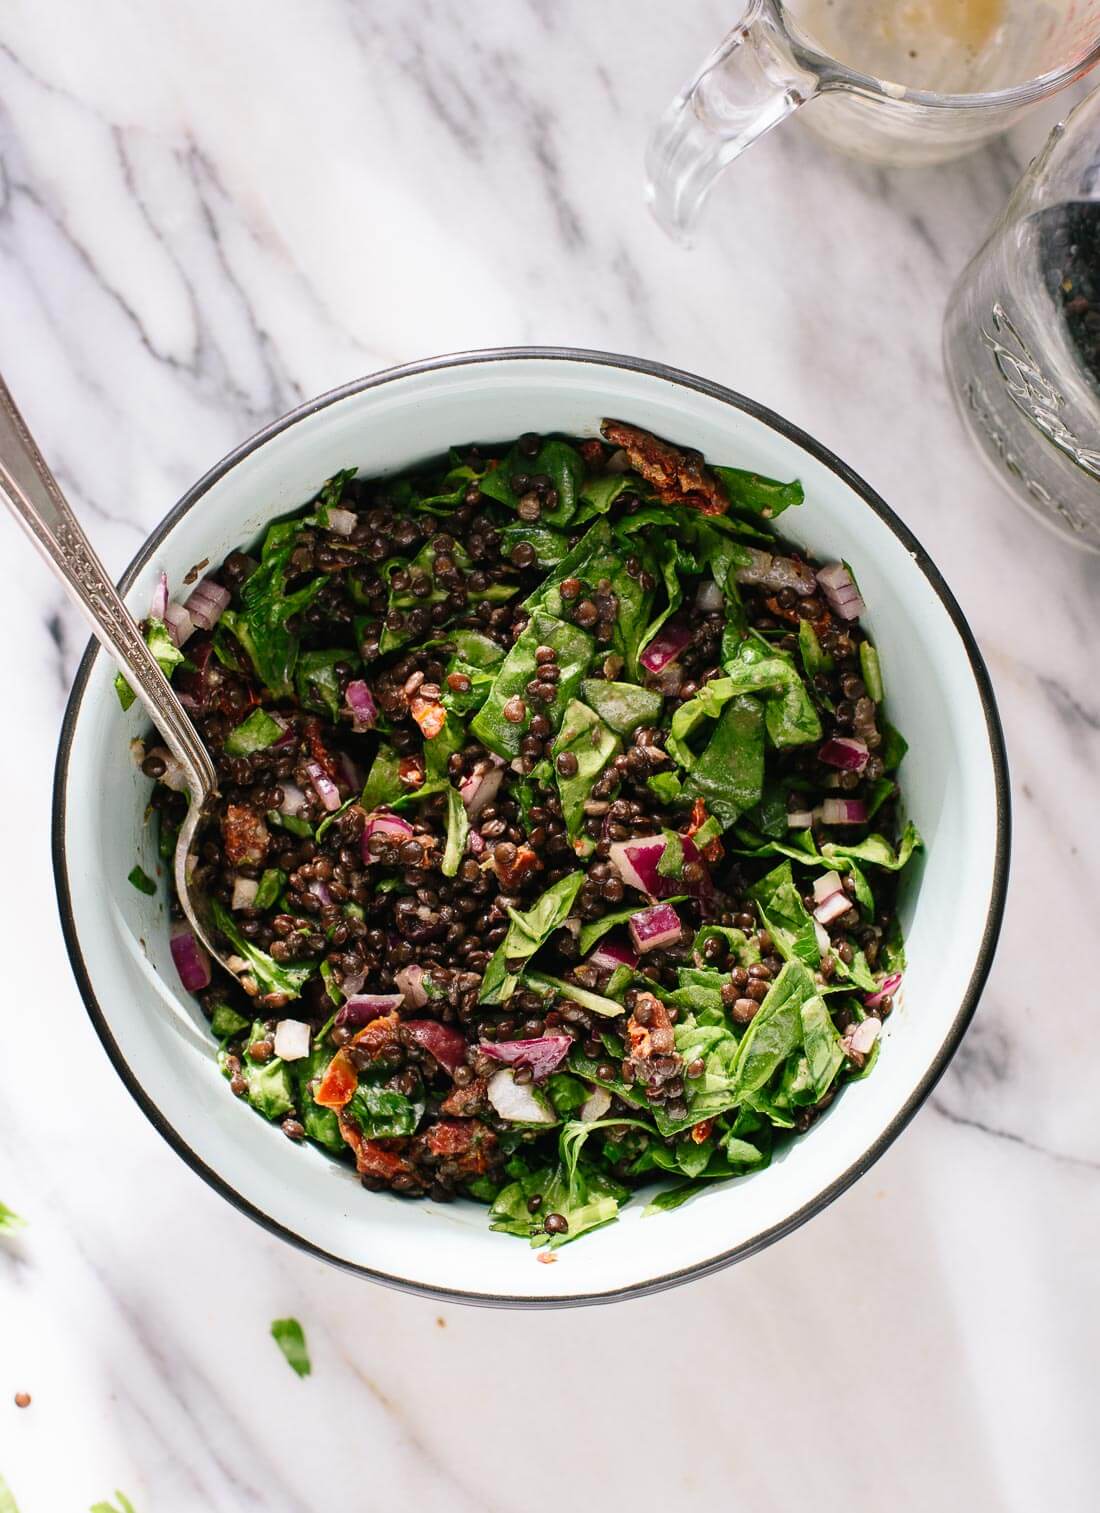 This Greek lentil salad packs great for tomorrow's lunch! cookieandkate.com